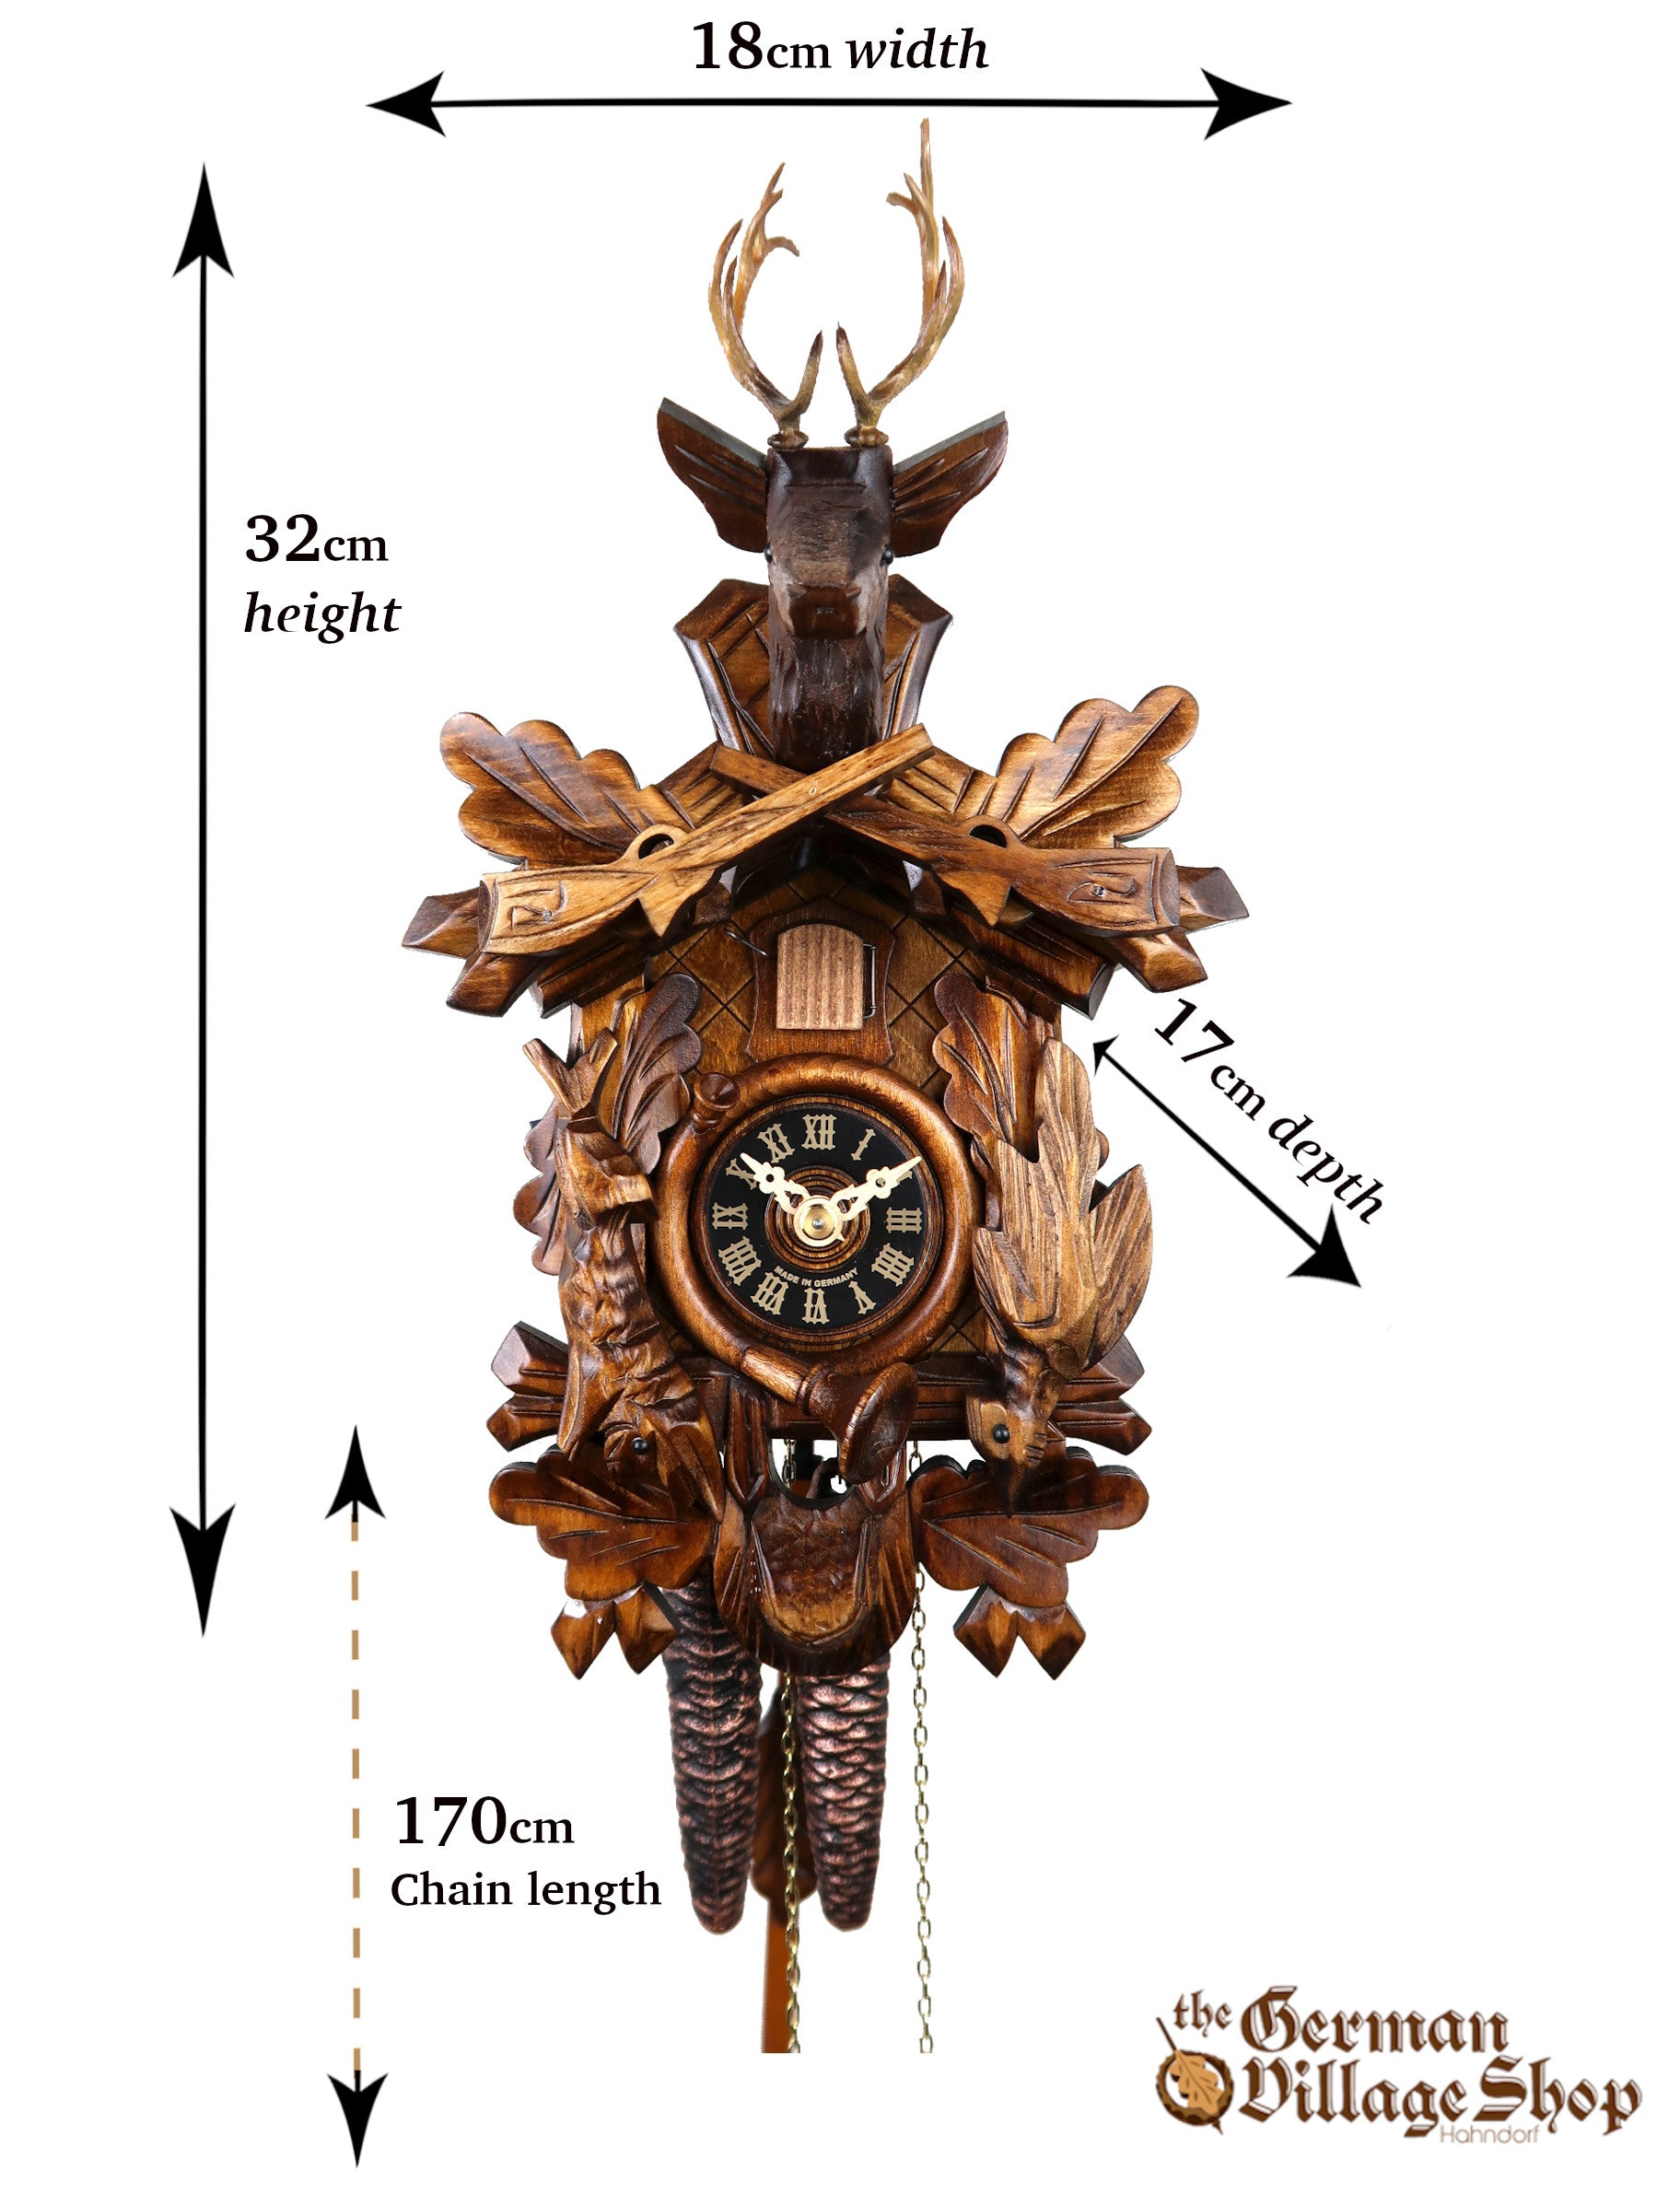 Size of German cuckoo clock imported and for sale in Australia